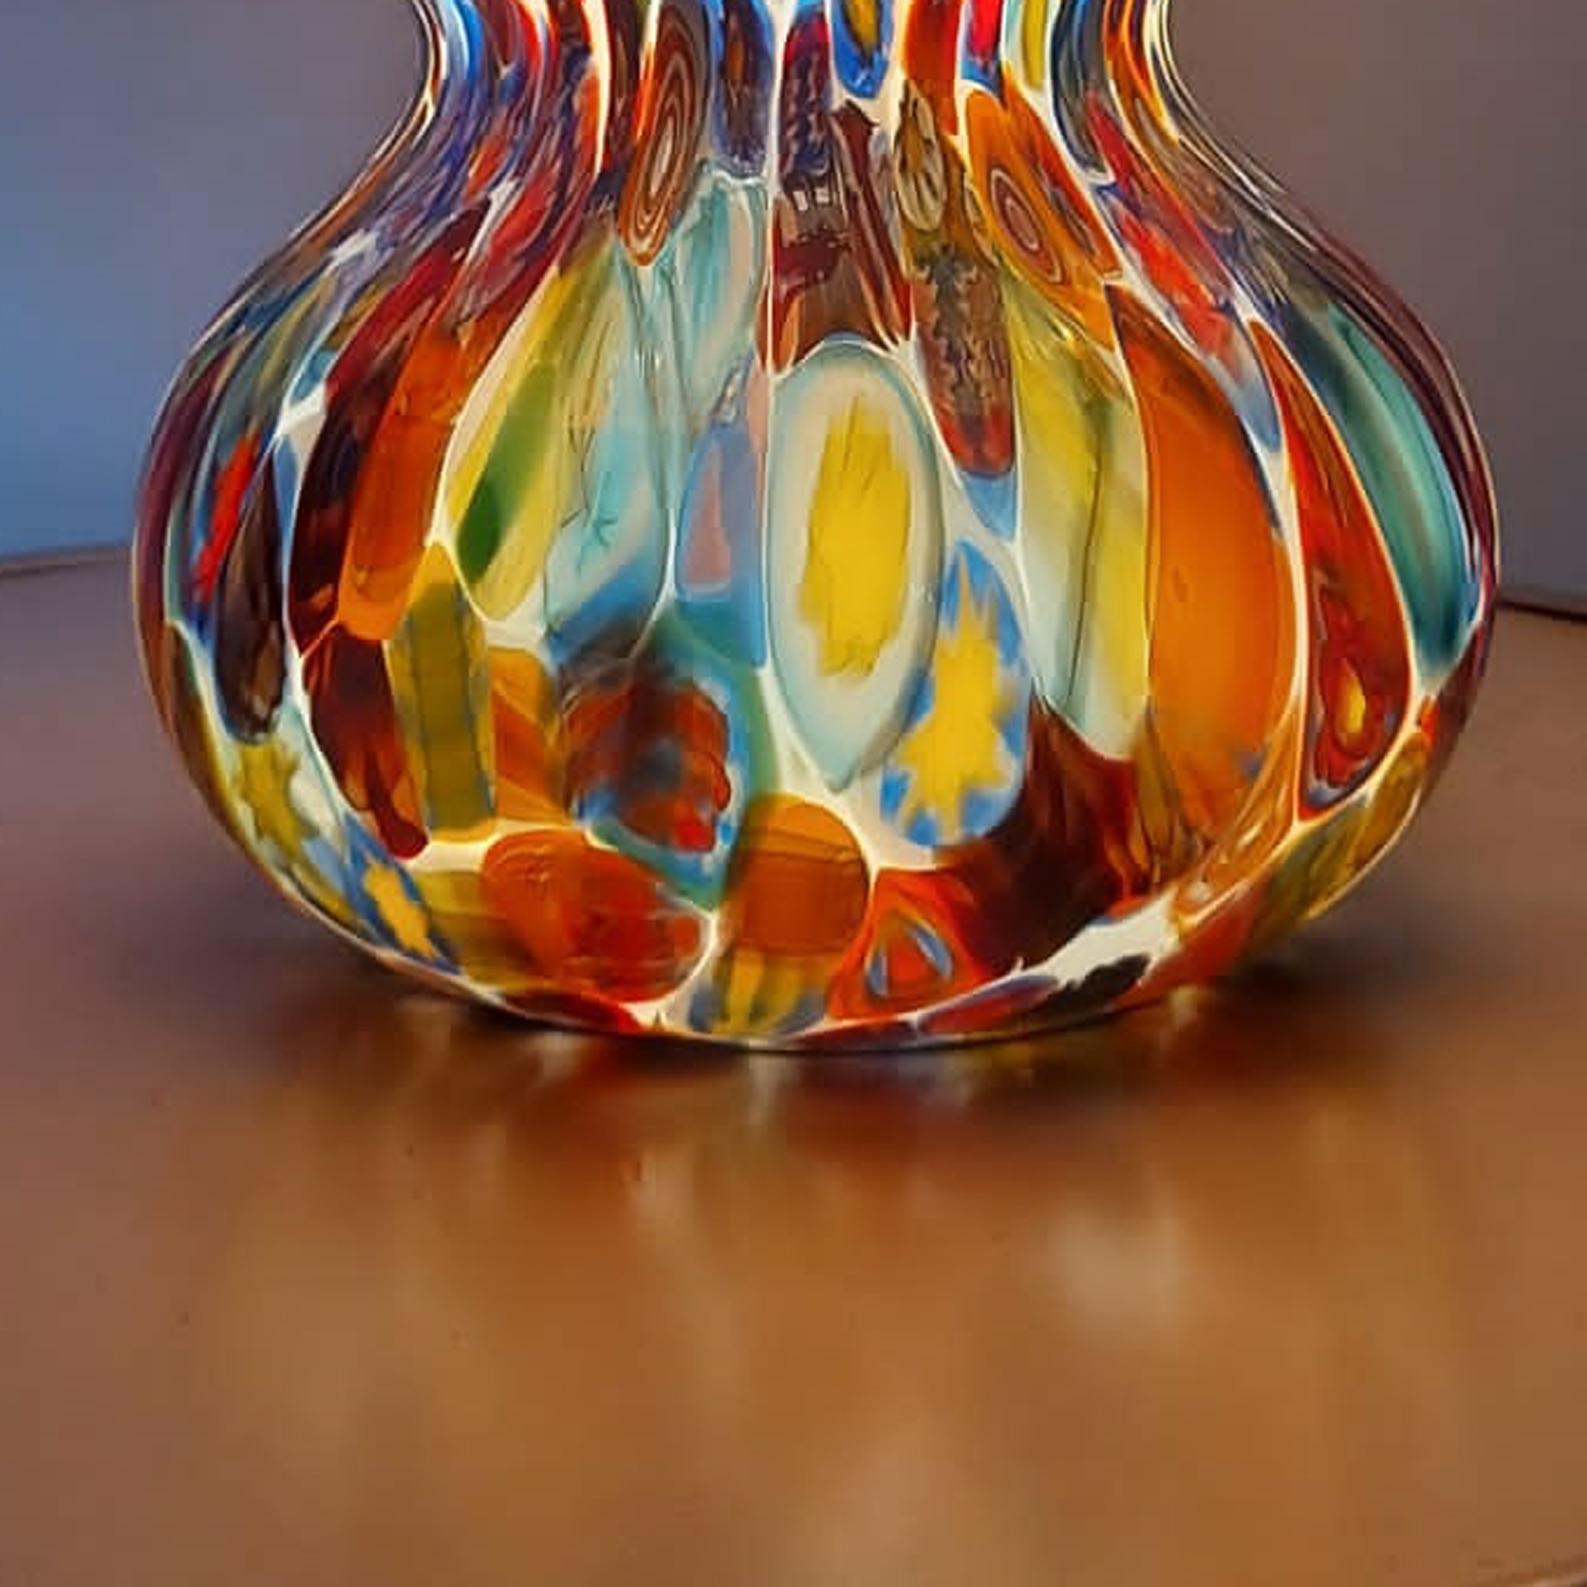 Pair of Big Hancrafted Murano Table Lamps Murrine Millefiori Decor, Italy 2000's For Sale 1